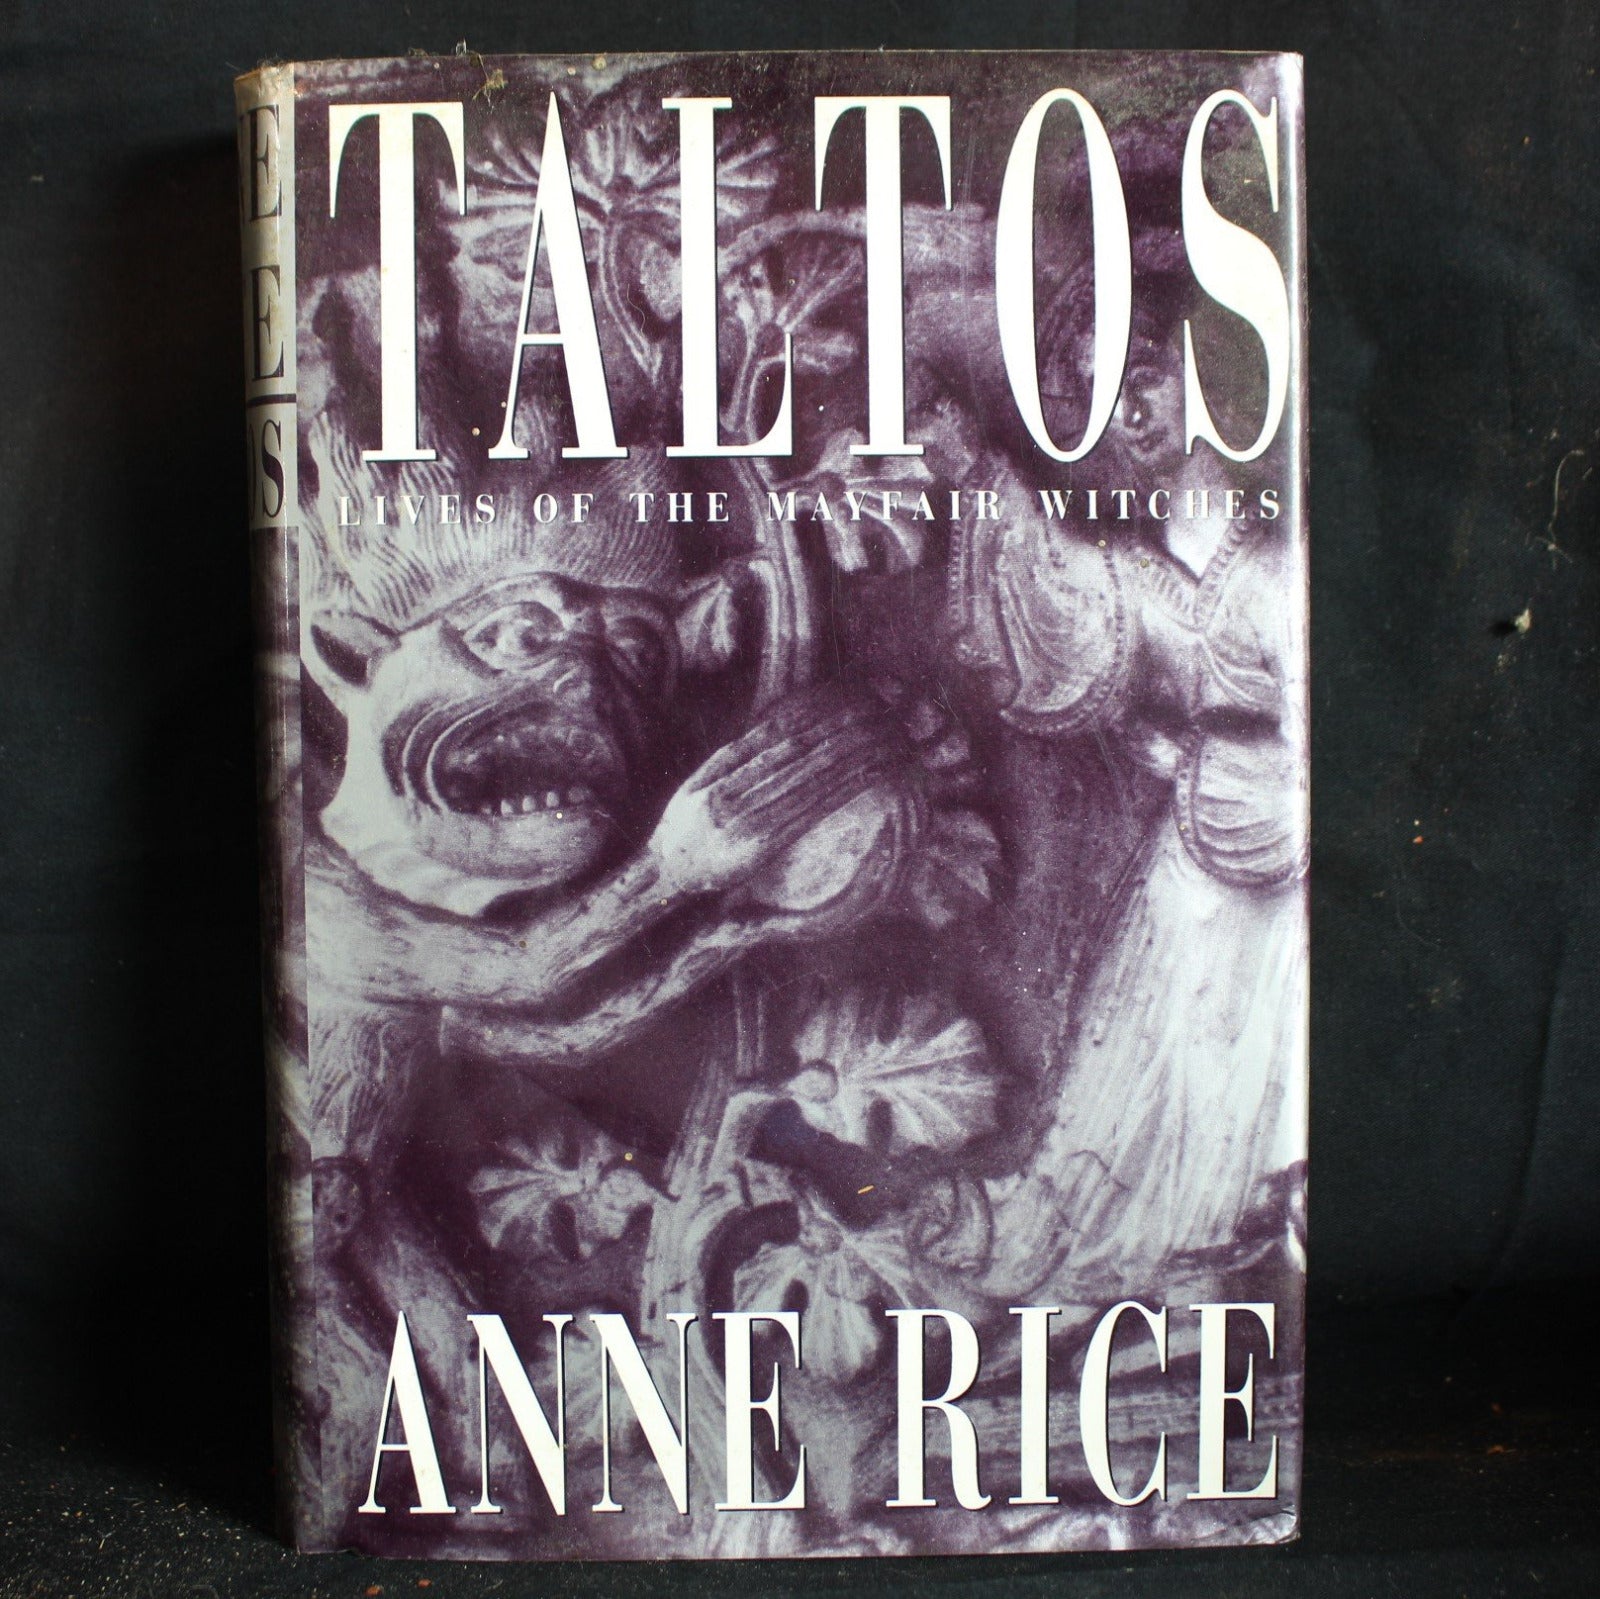 Hardcover Taltos (Lives of the Mayfair Witches #3) by Anne Rice, 1994